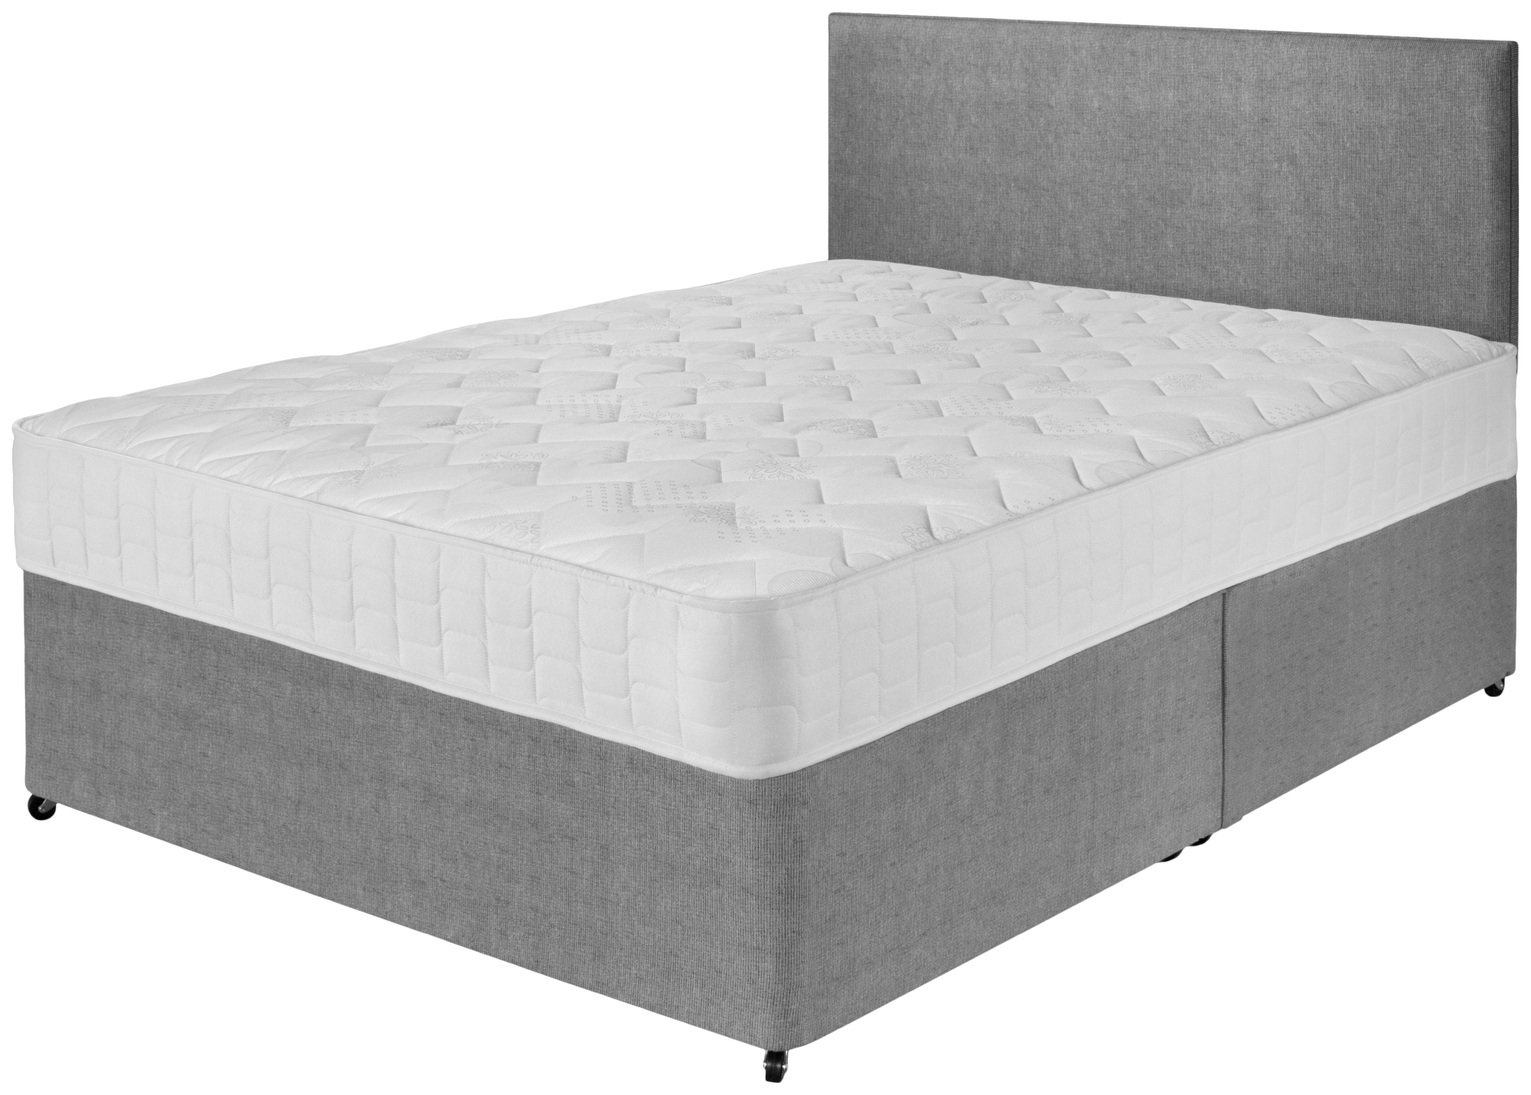 Argos Home Elmdon Double Deep Ortho Divan Bed Reviews - Updated April 2023